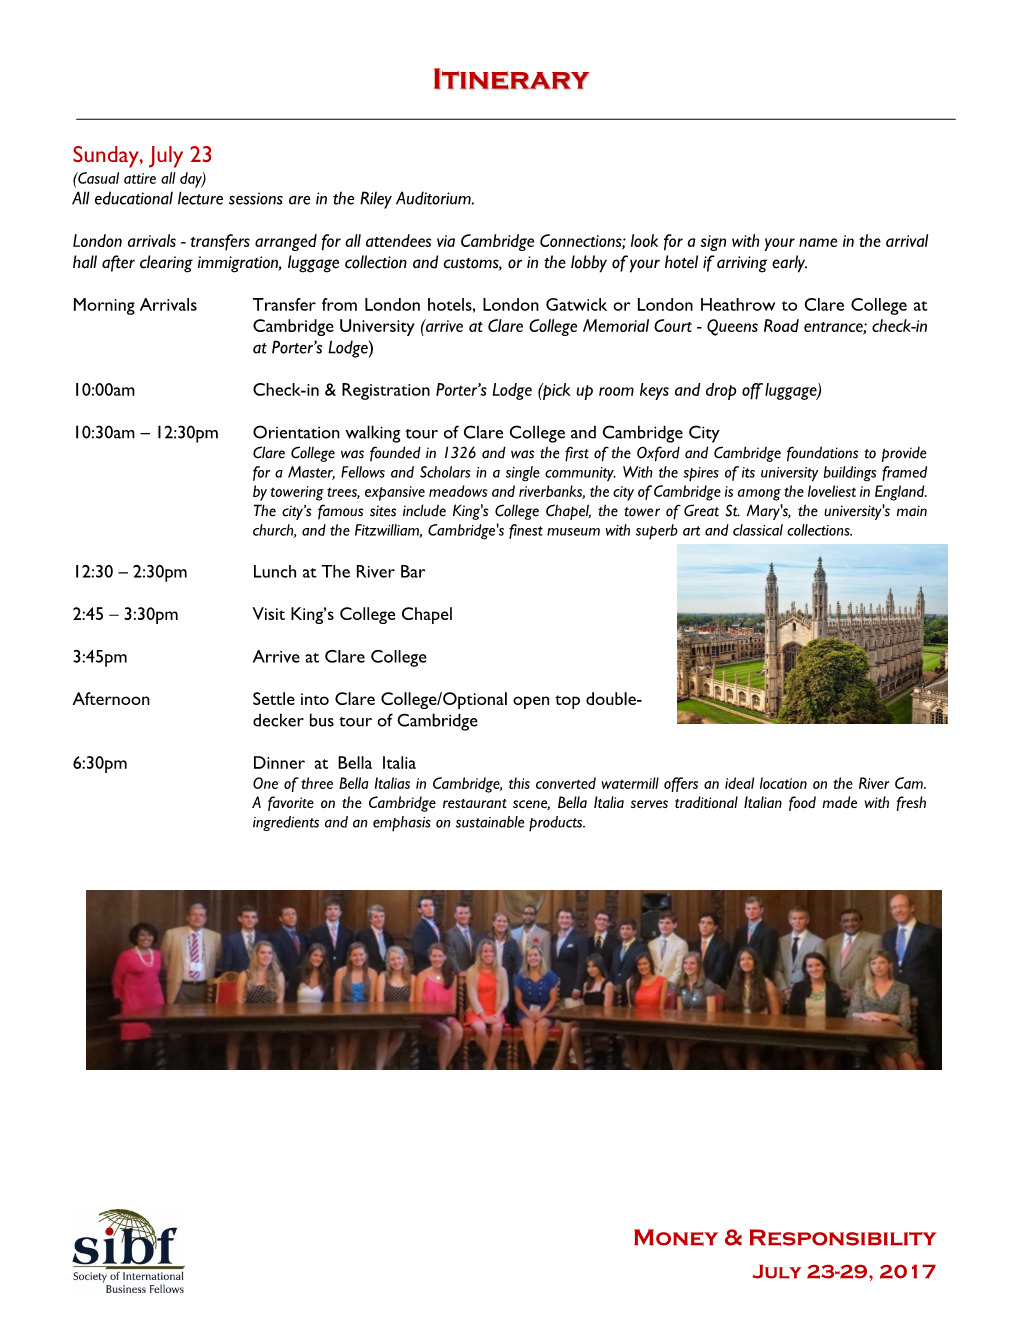 View the 2017 Cambridge Itinerary